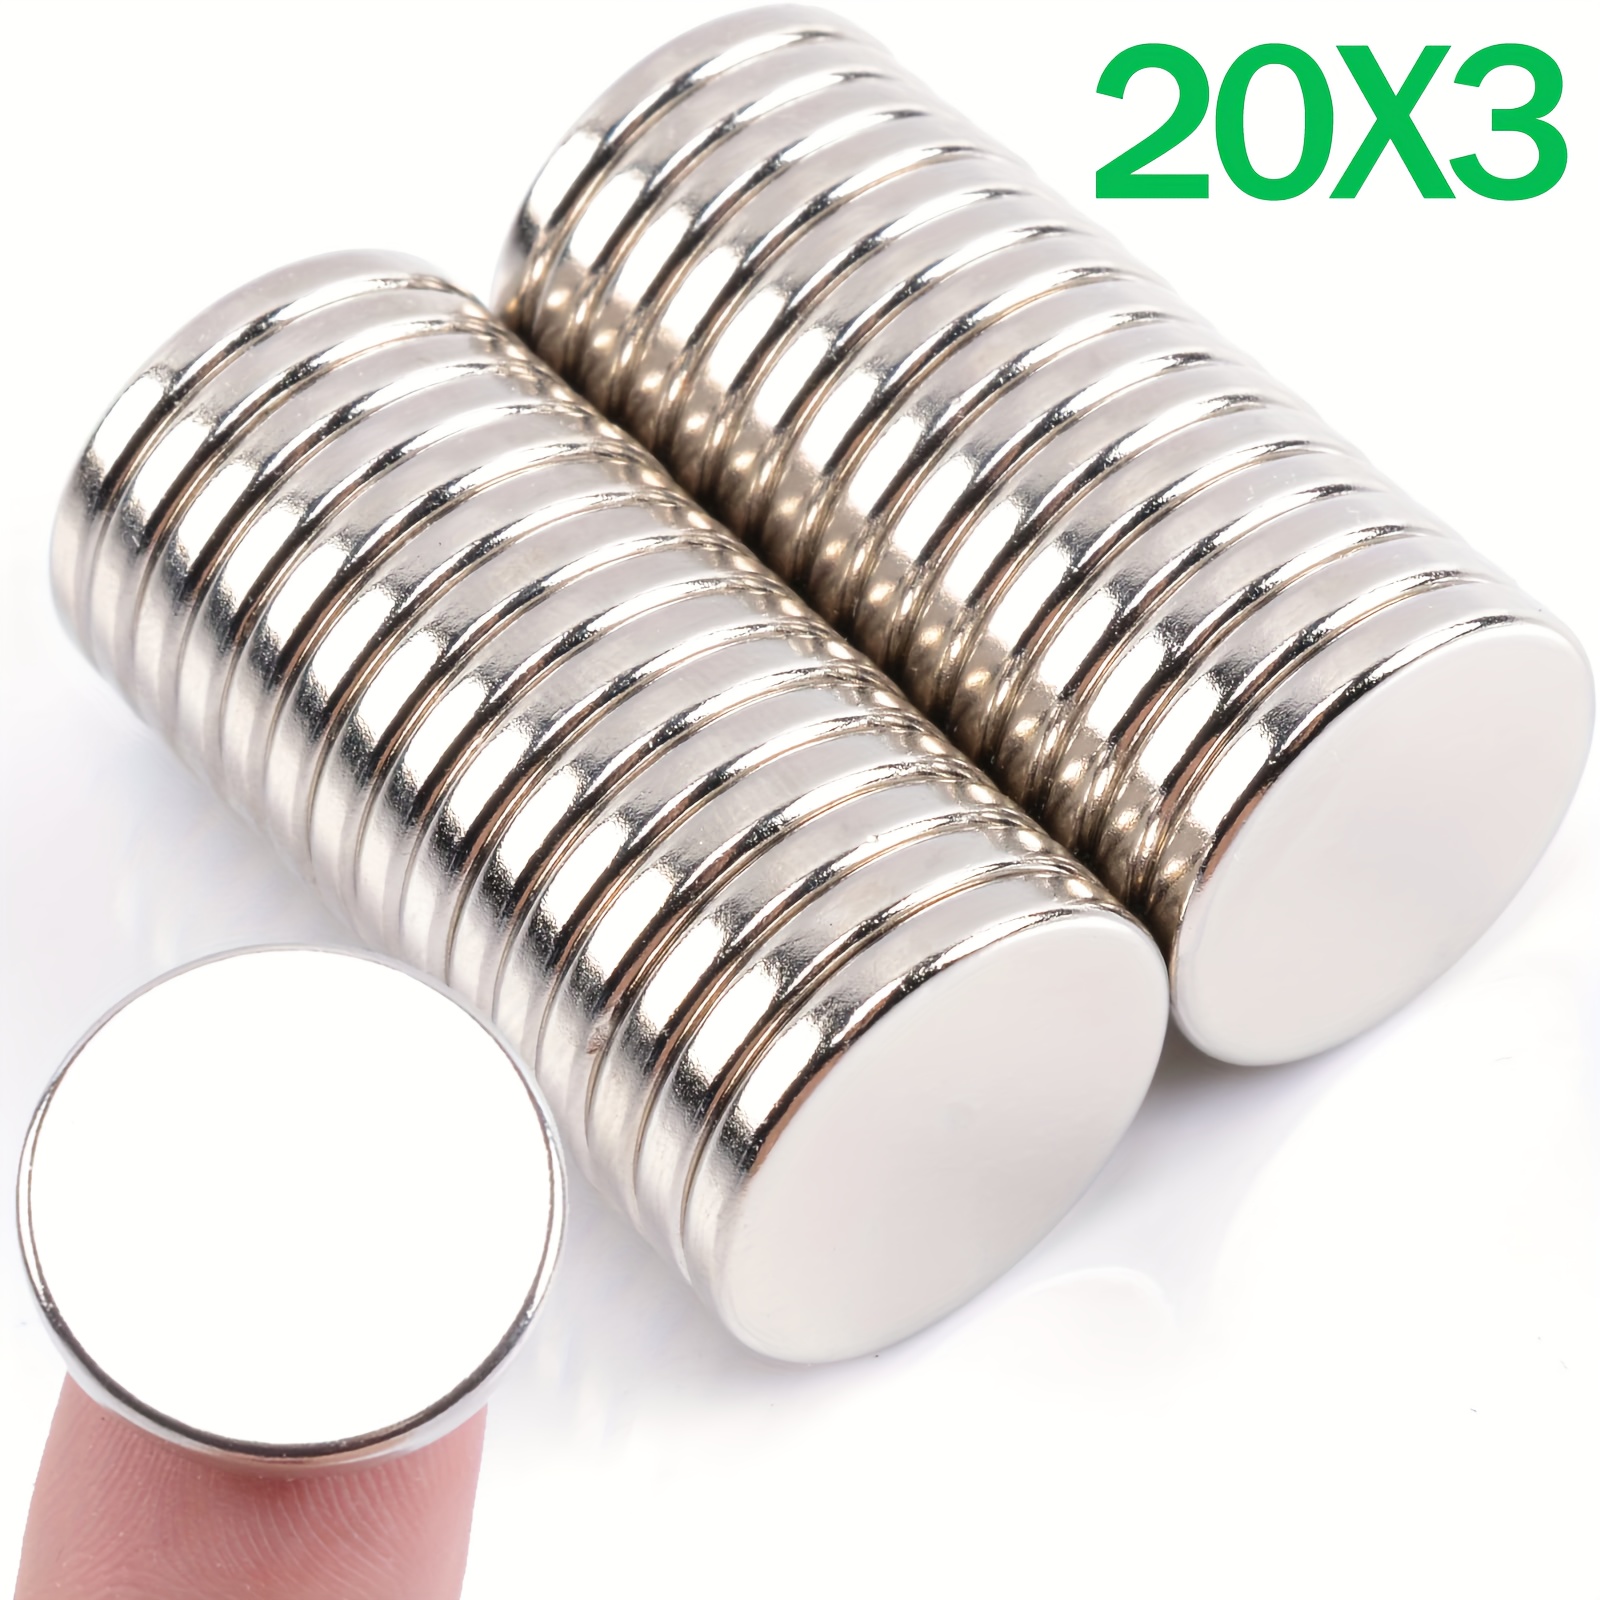 Fishing Magnet, Max255lbs Pull Strong Magnets, Heavy Duty Big Rare Earth  Magnet, Large Magnet for Remover, Super Neodymium High Power Magnet with  Handle for Tag, Shop, Lifting and Pick up